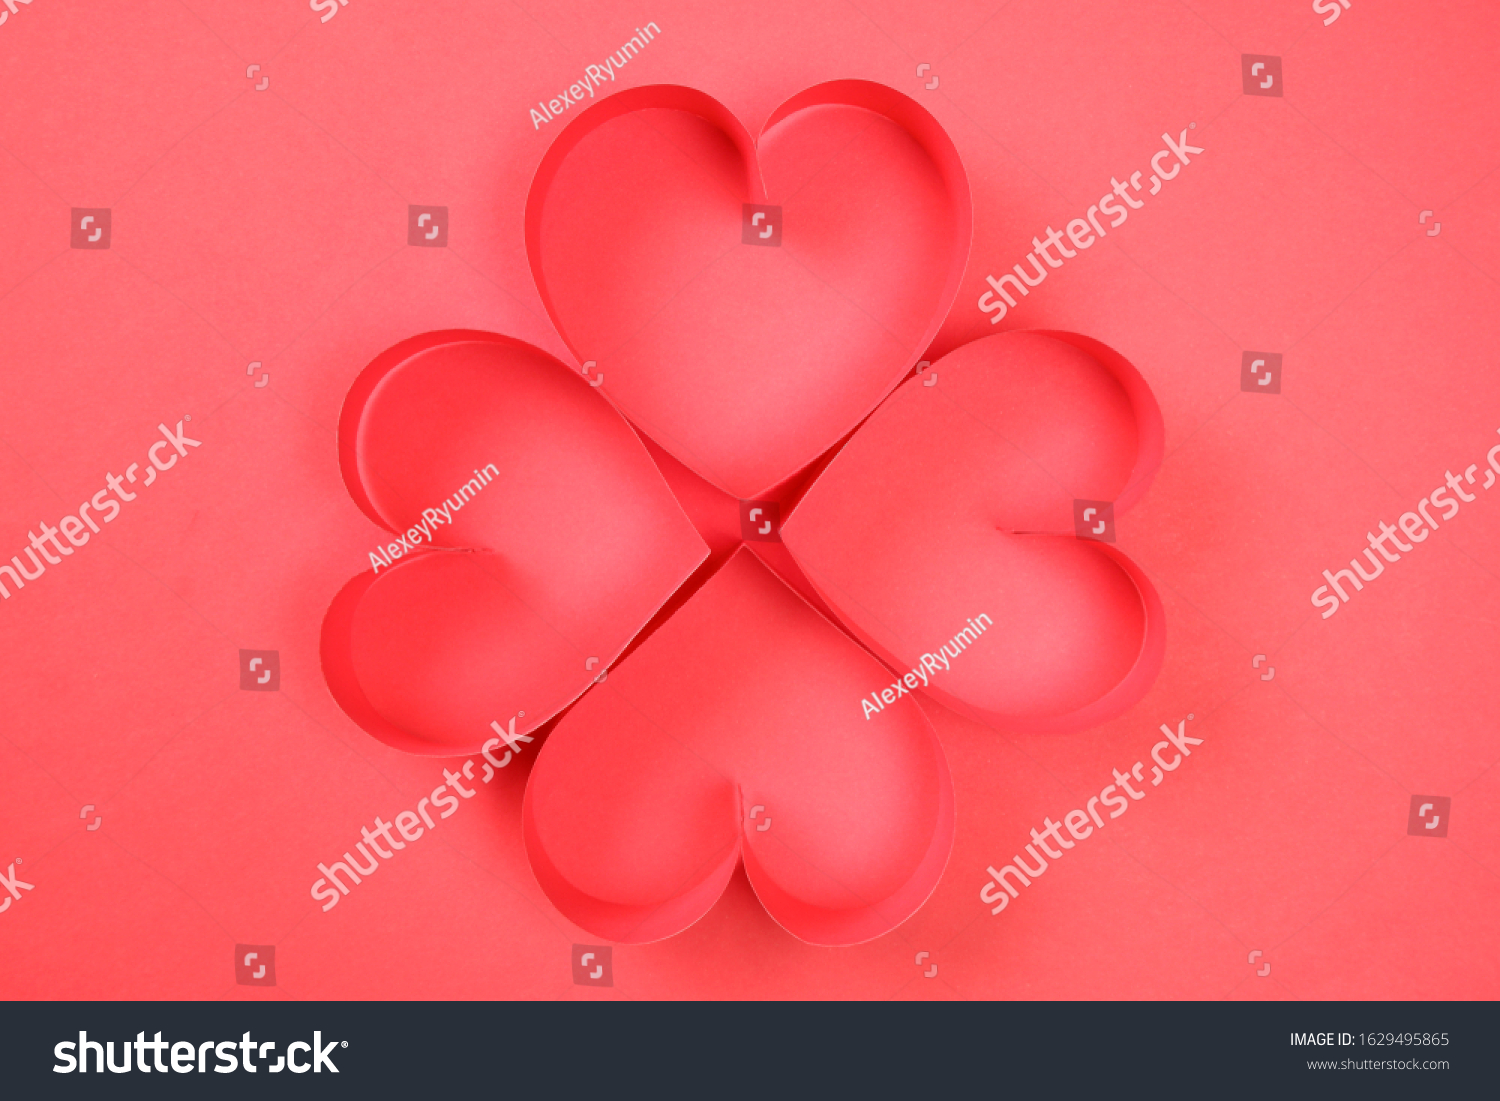 Four of red paper hearts on red background top view. Cute love, valentines day, womens day banner, offer, card, invitation, flyer, poster template.